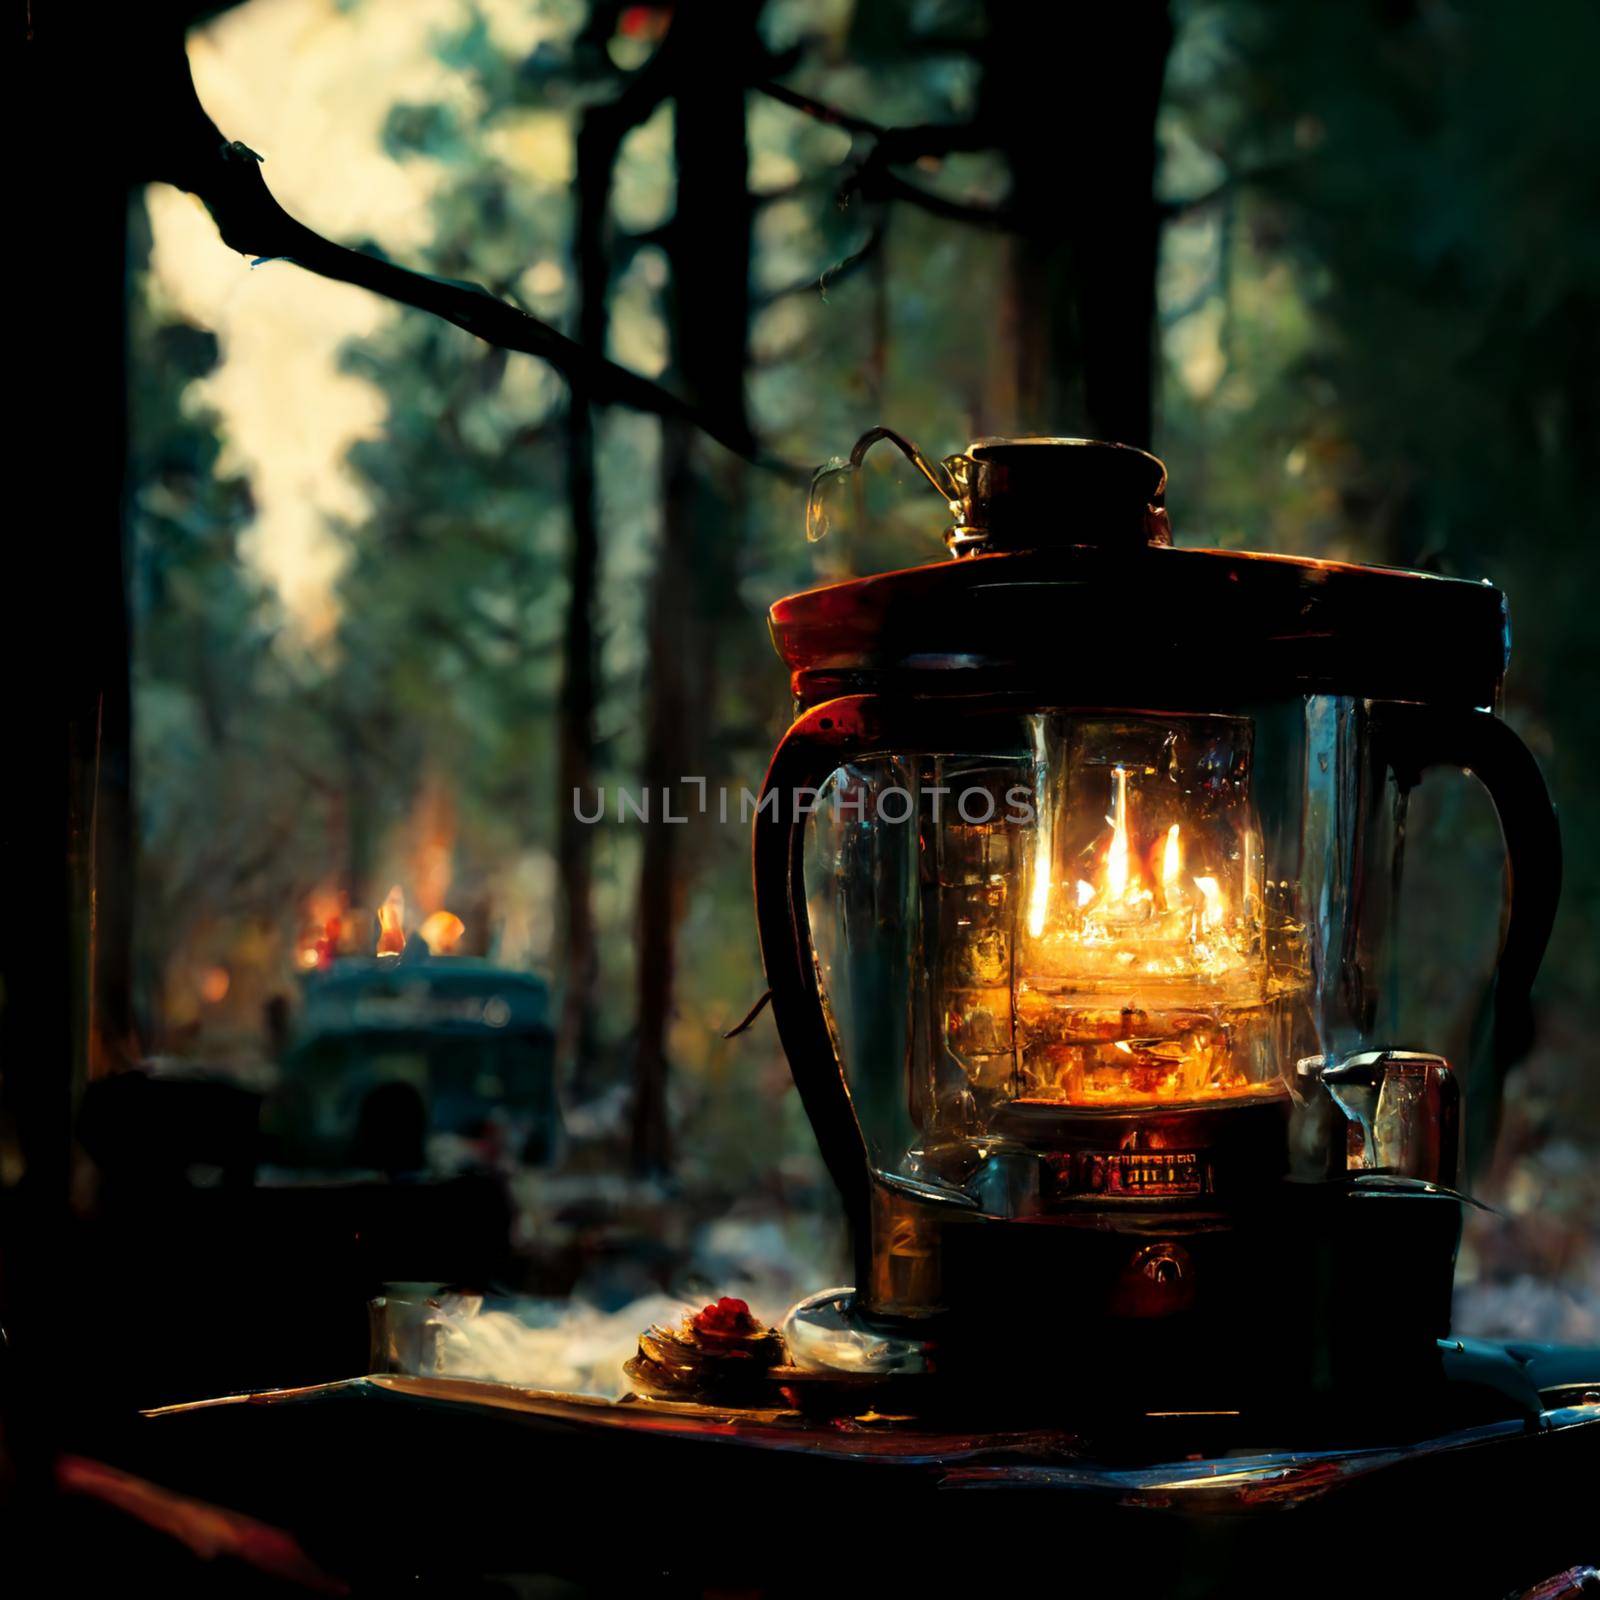 Abstract illustration of an oil lamp in the forest by NeuroSky